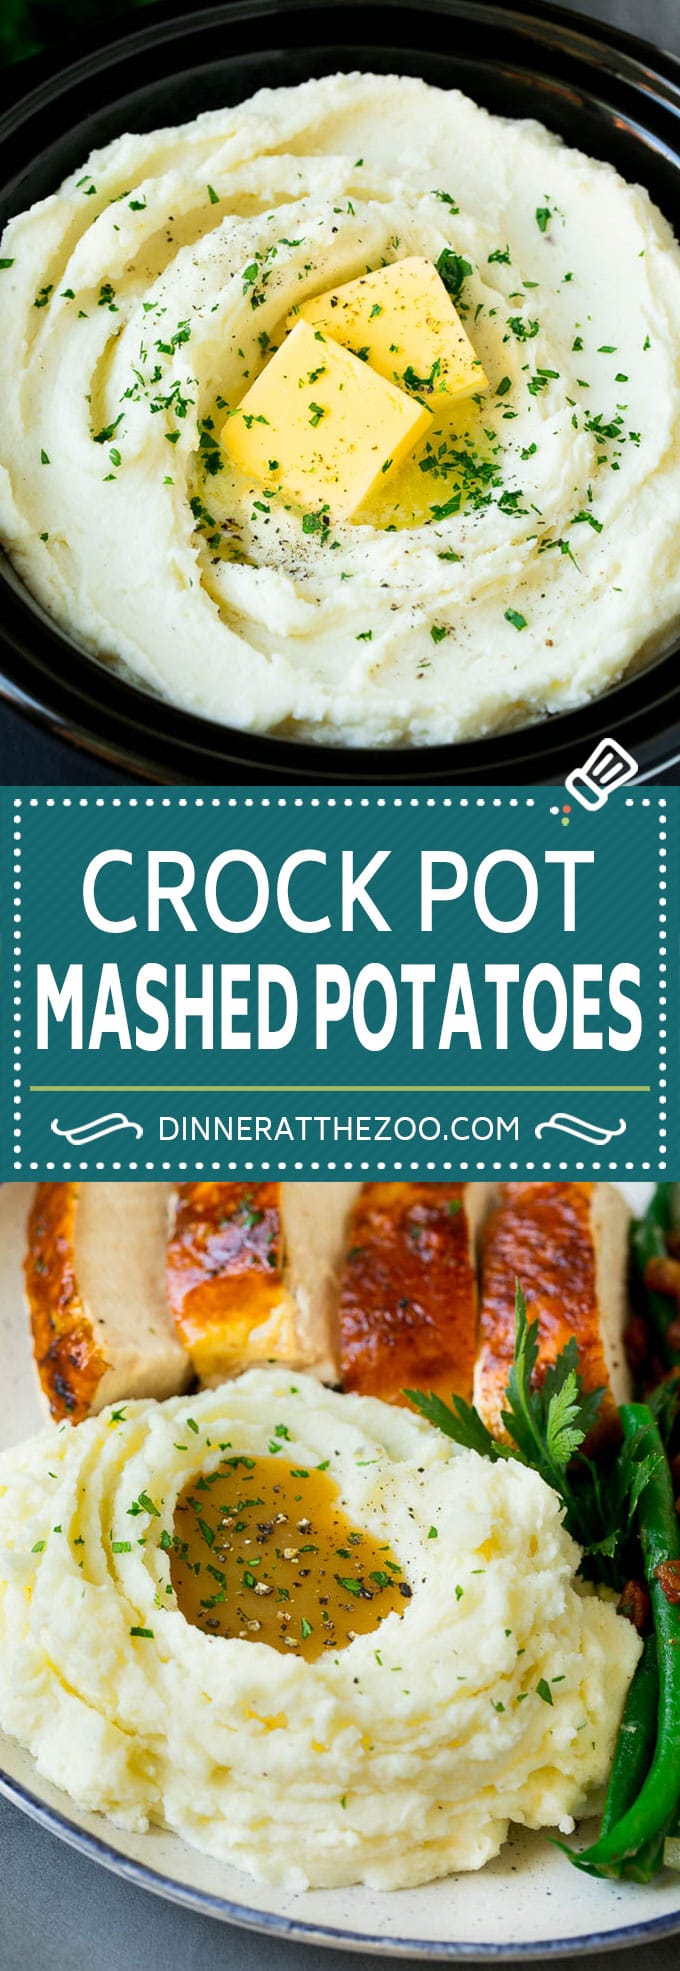 These crock pot mashed potatoes are diced Russet potatoes that are simmered in the slow cooker, then mashed with butter and cream cheese for a decadent side dish.